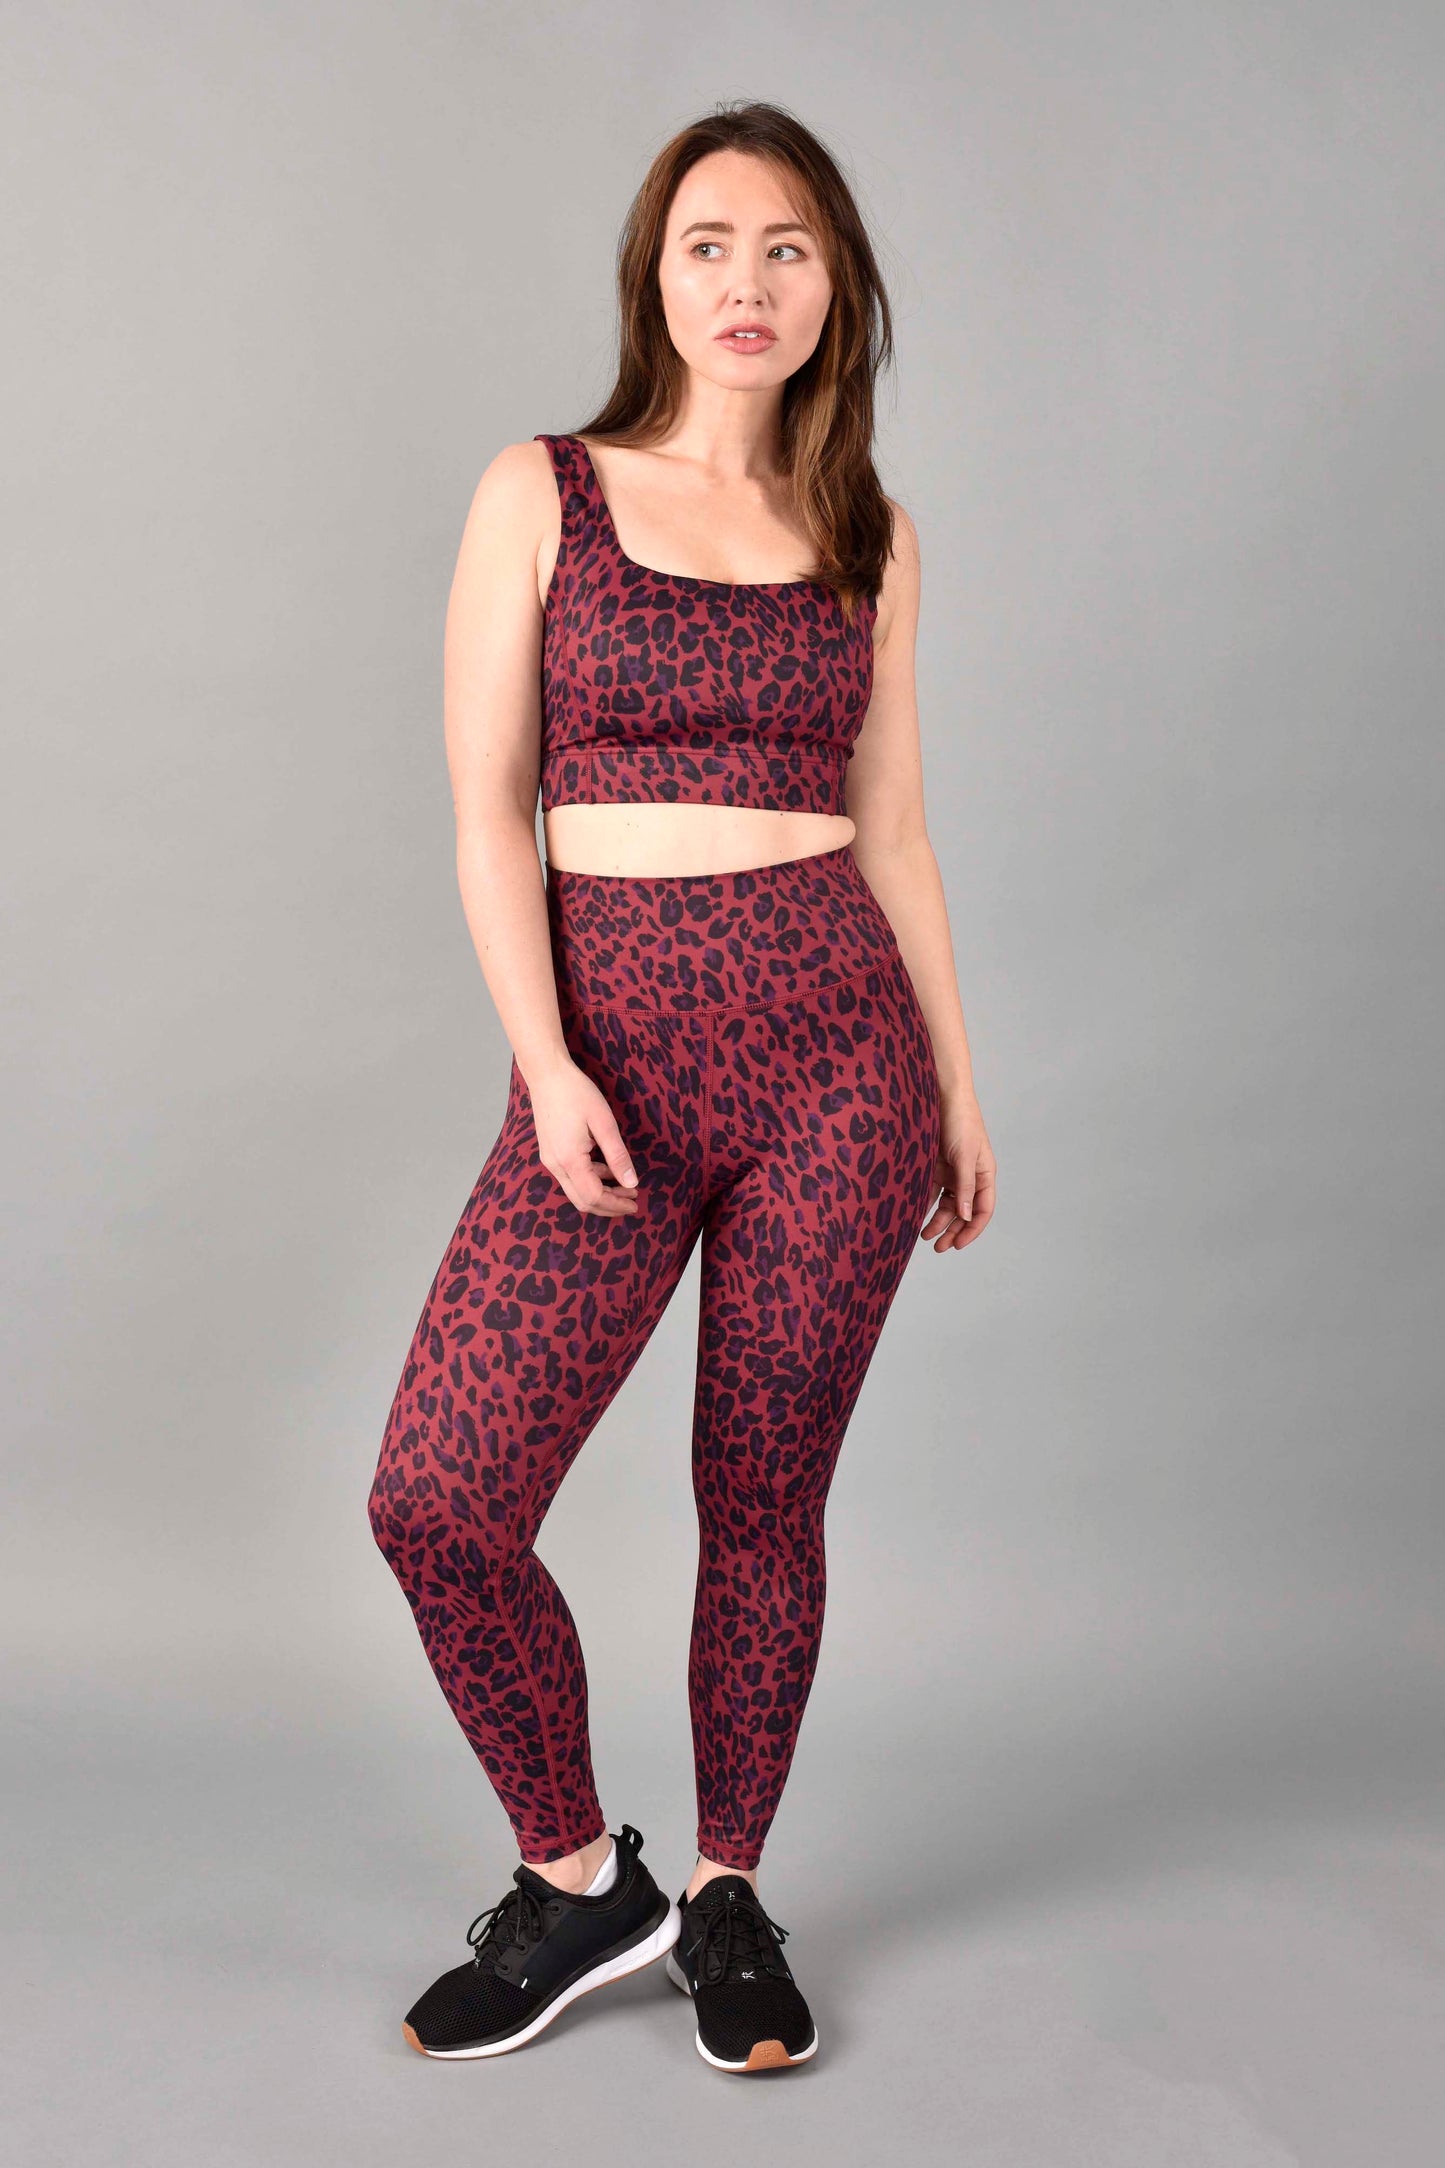 Wear Love More Brigitte Longline Sports Bra in Recycled Luxe Red Velvet Leopard.  Longline bra with square neckline with V-back , wide straps in a red leopard print.  Fabric is made from Recycled Polyester.  Fully lined with removable padding.  Featured paired with match 7/8 legging